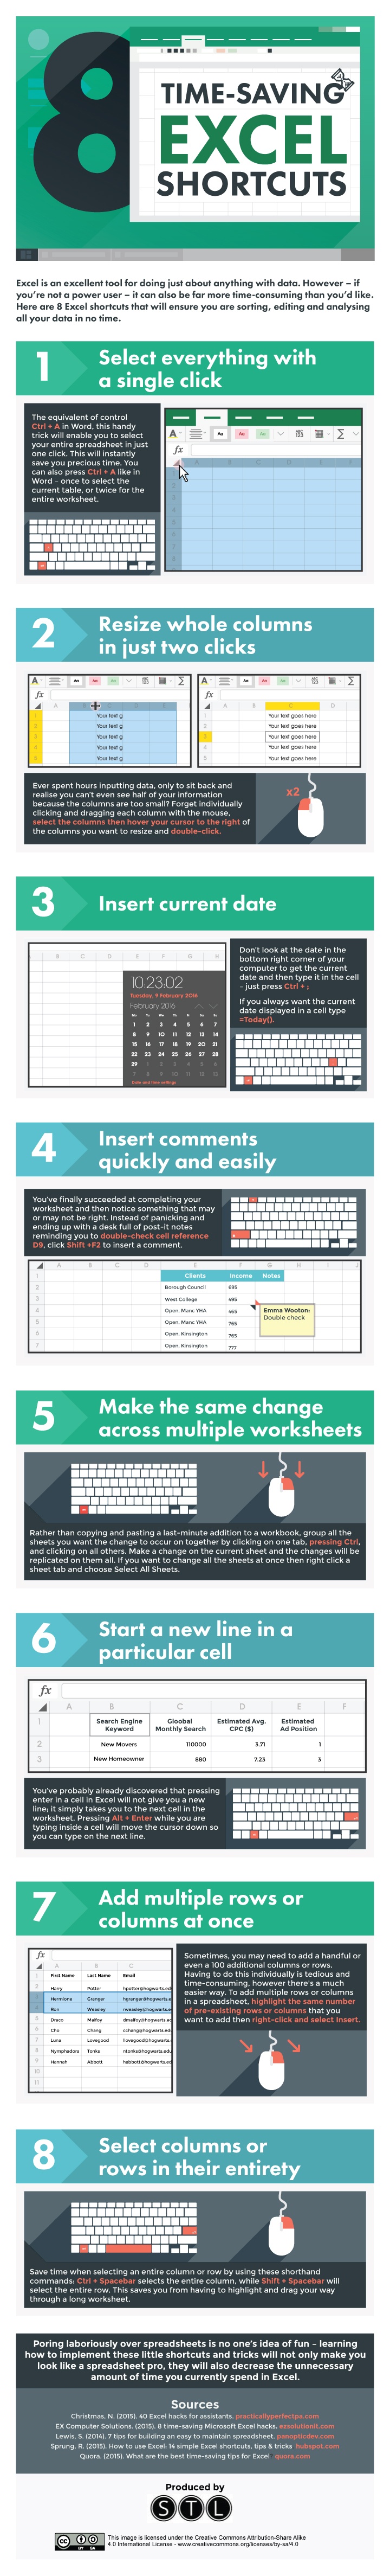 Excel_Shortcuts_Infographic